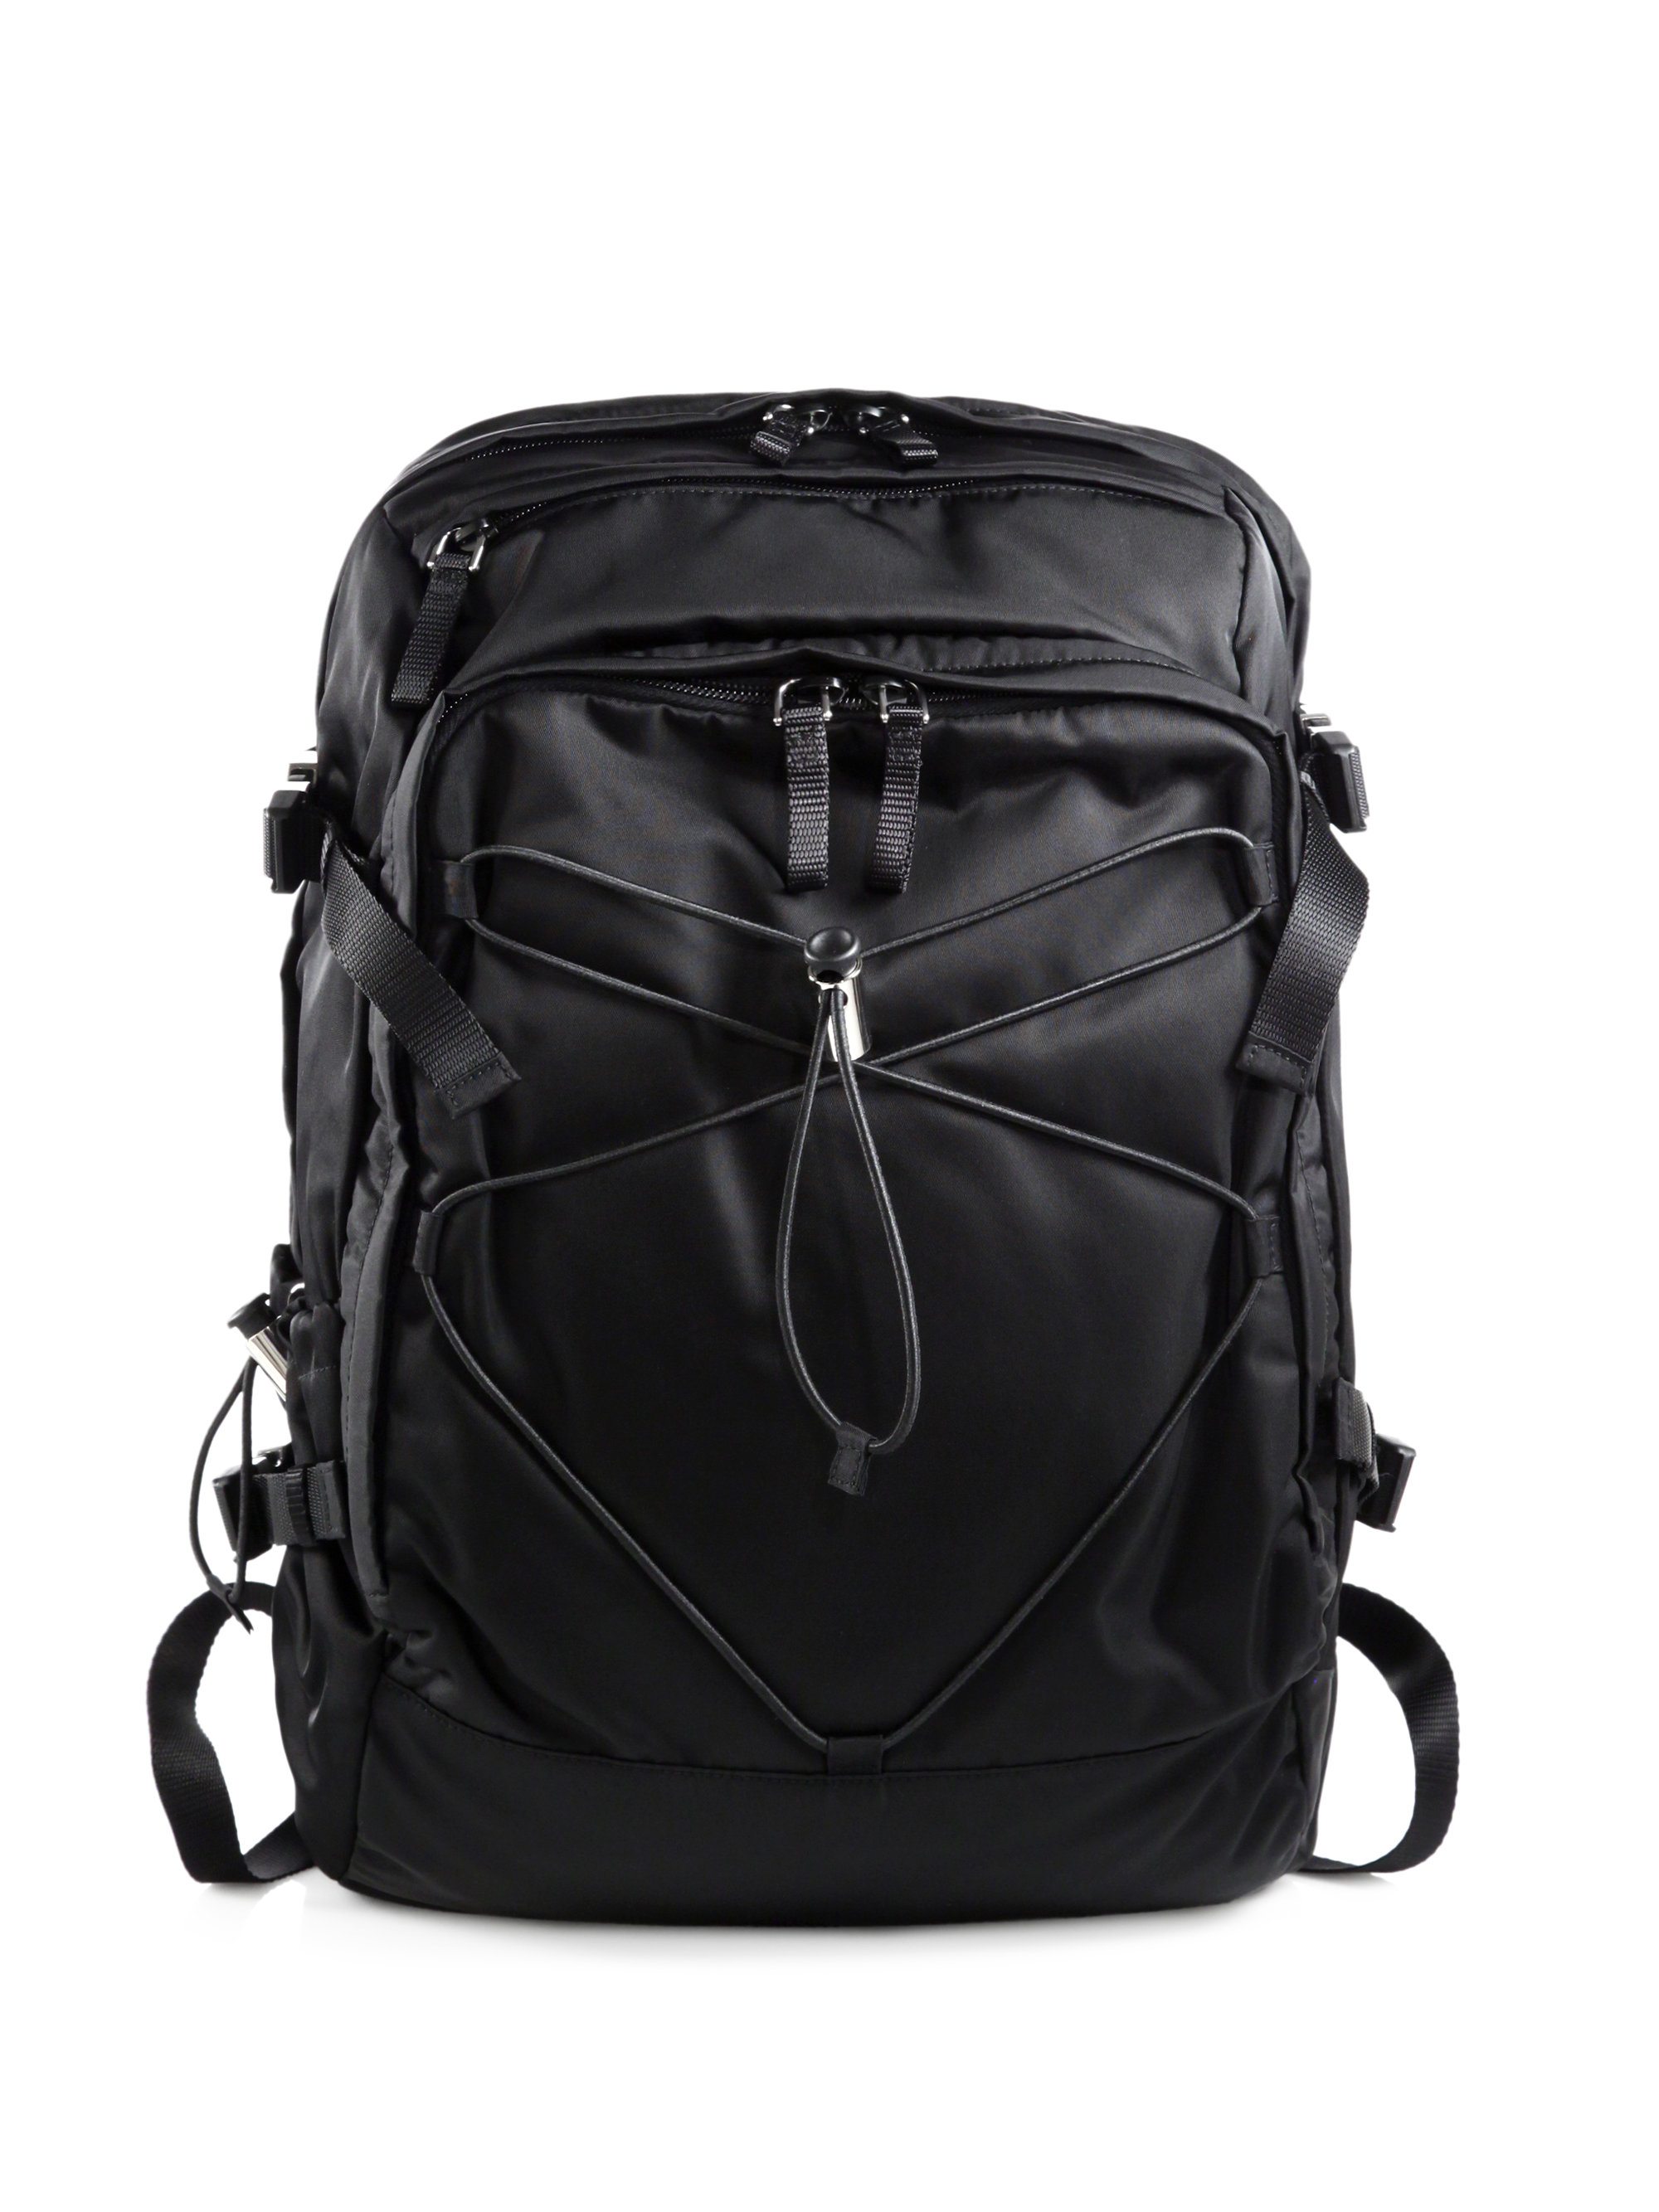 Prada Nylon And Leather Backpack in Black for Men | Lyst  